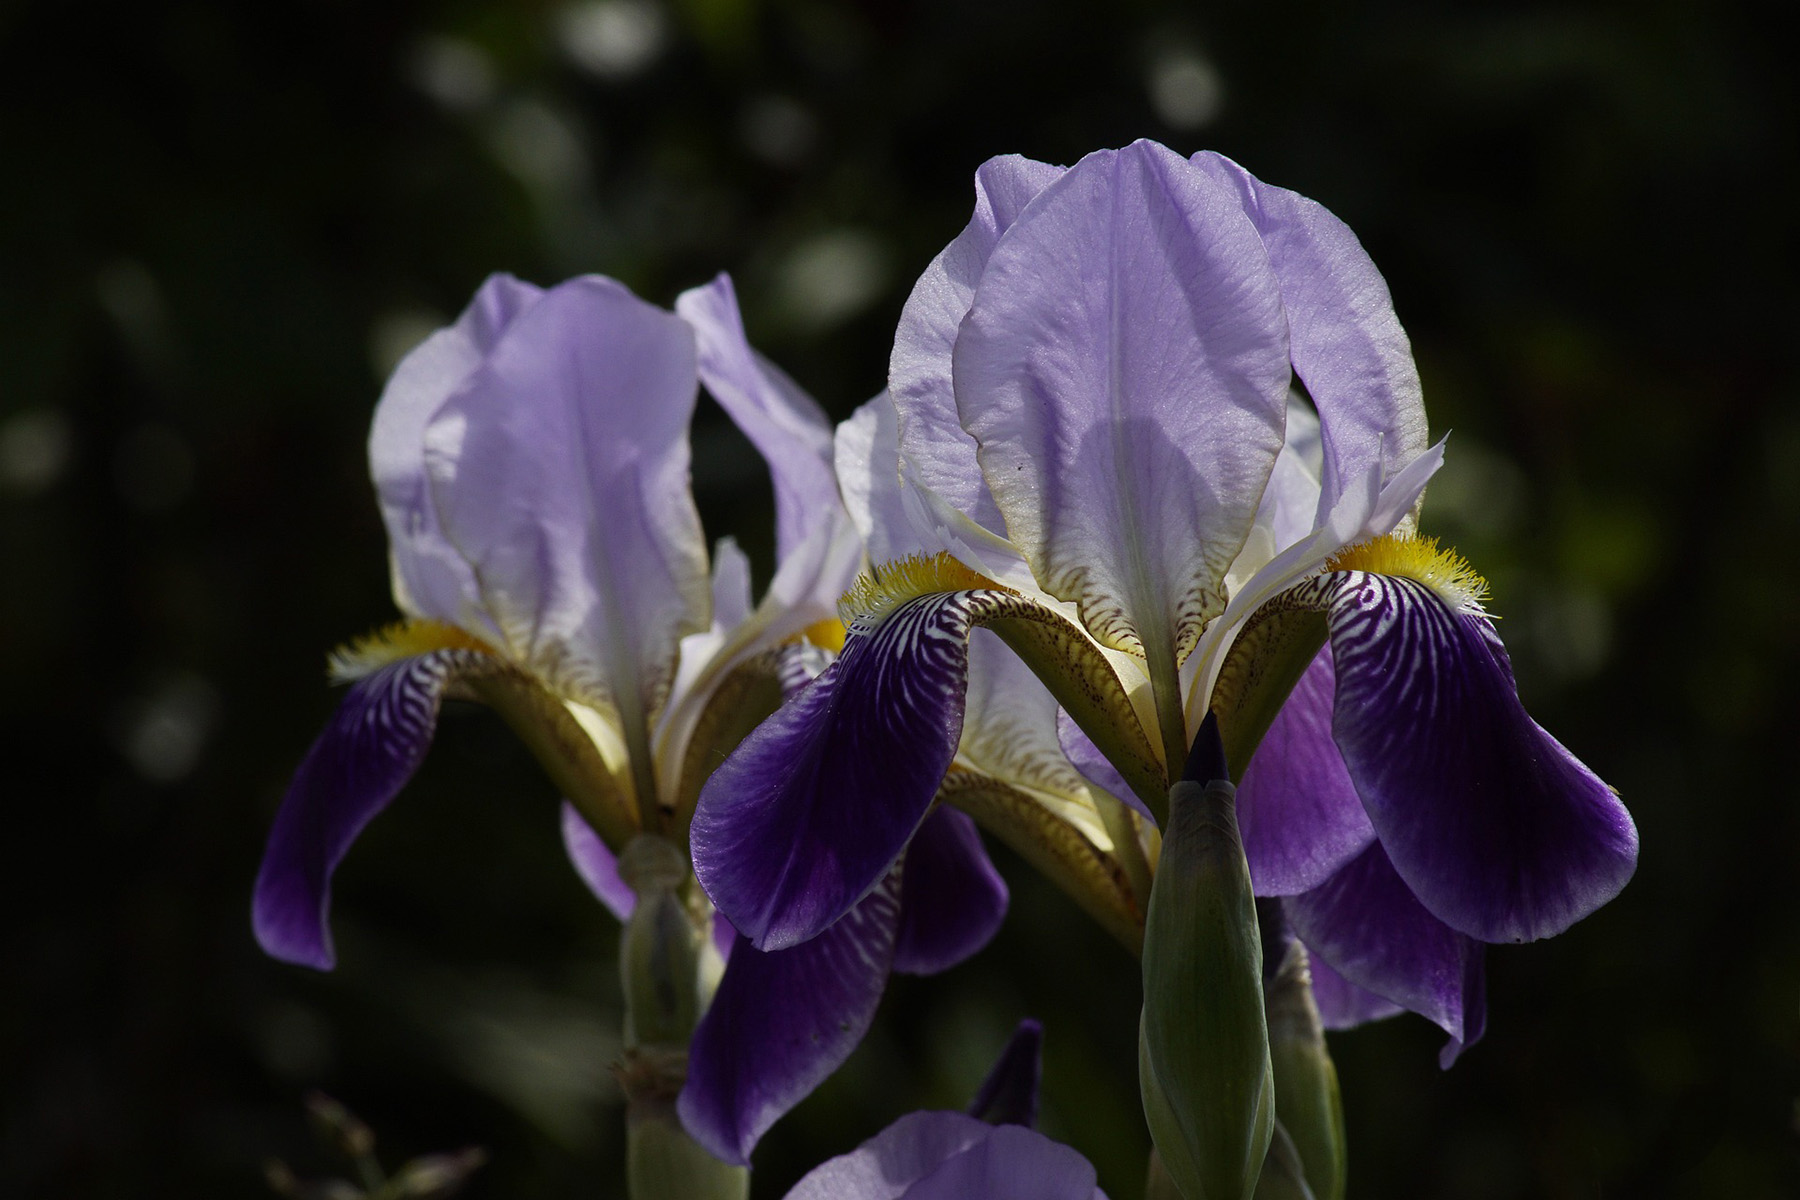 Picture of Iris flowers.